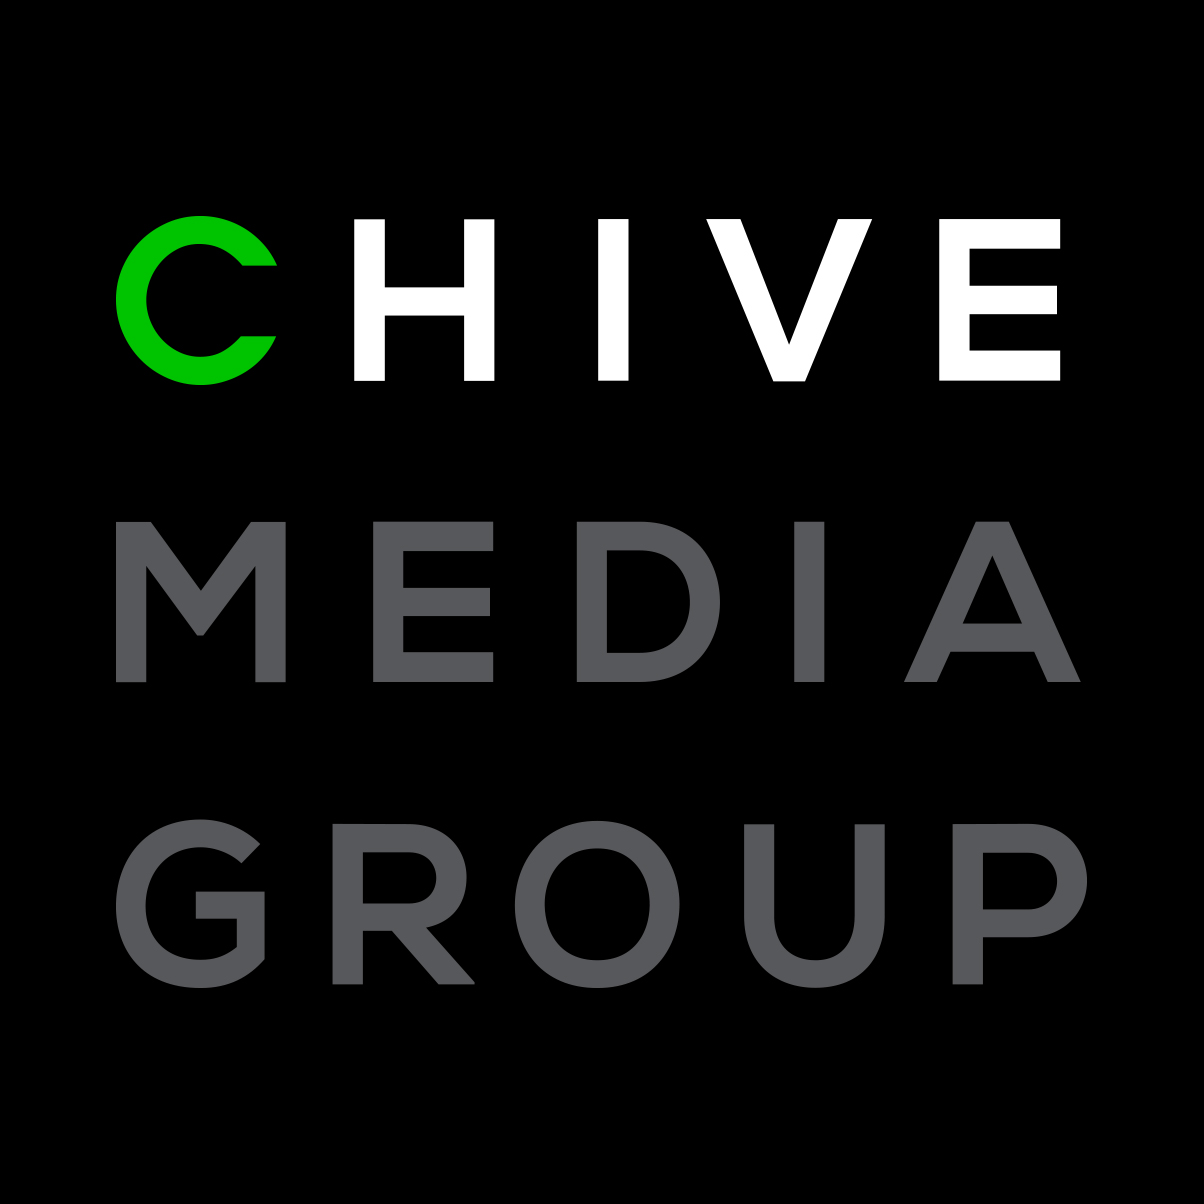 Chive Media Group